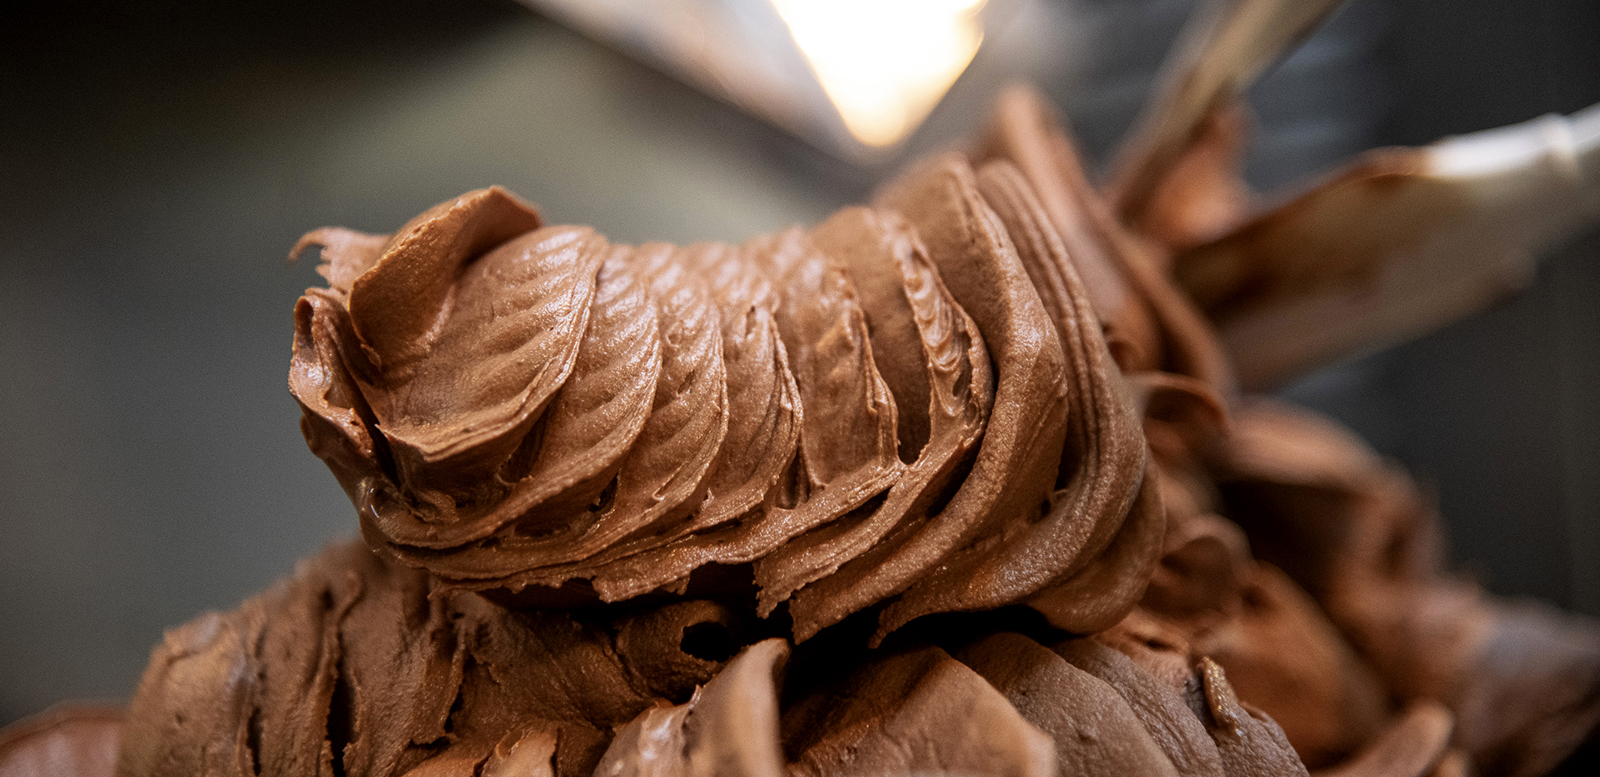 Our Partners talking about us: Amedei & Artico for the best Traditional Chocolate Gelato